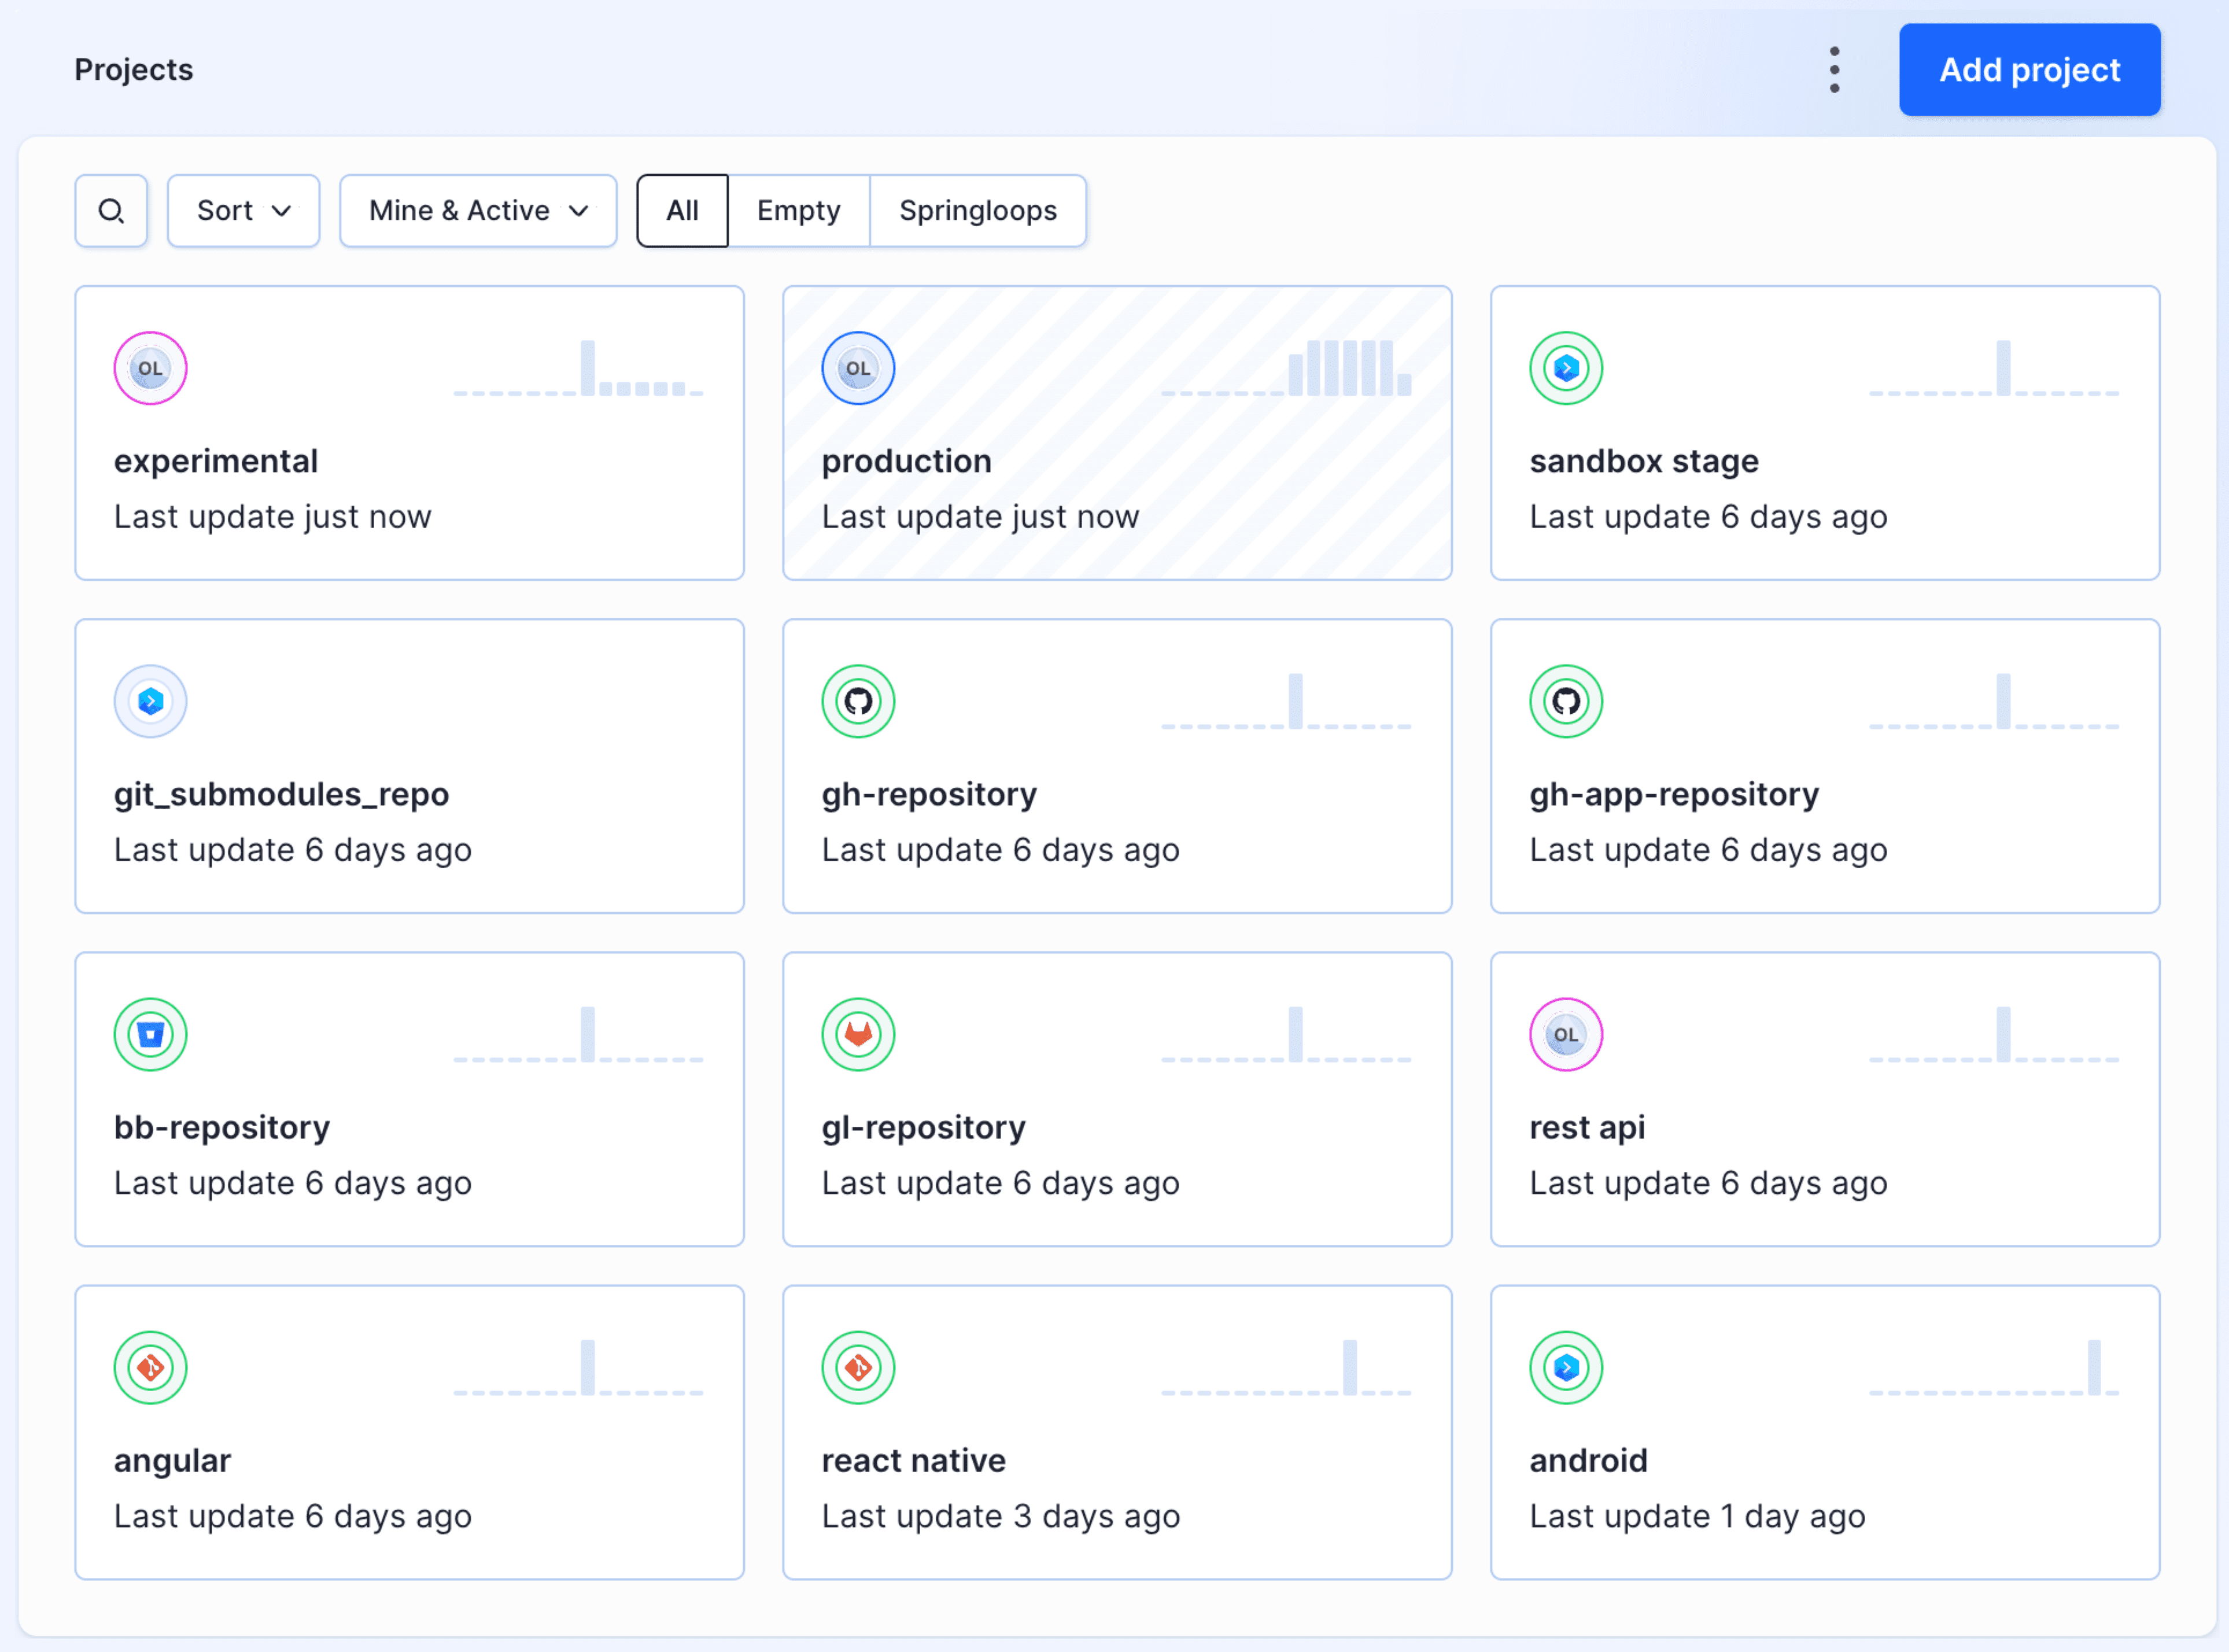 Dashboard: Project tiles